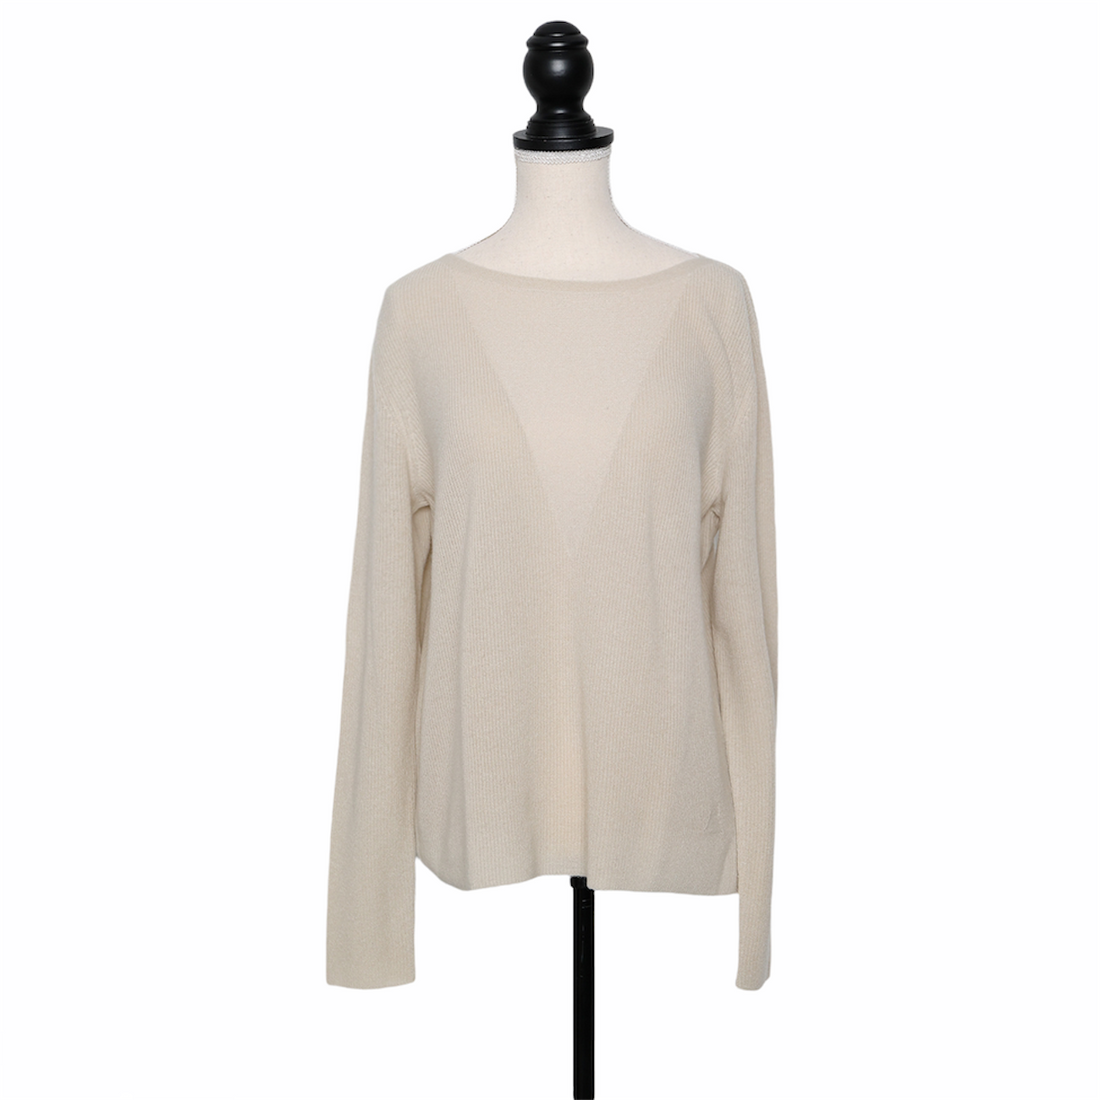 Akris rib knit crew neck sweater with long sleeves